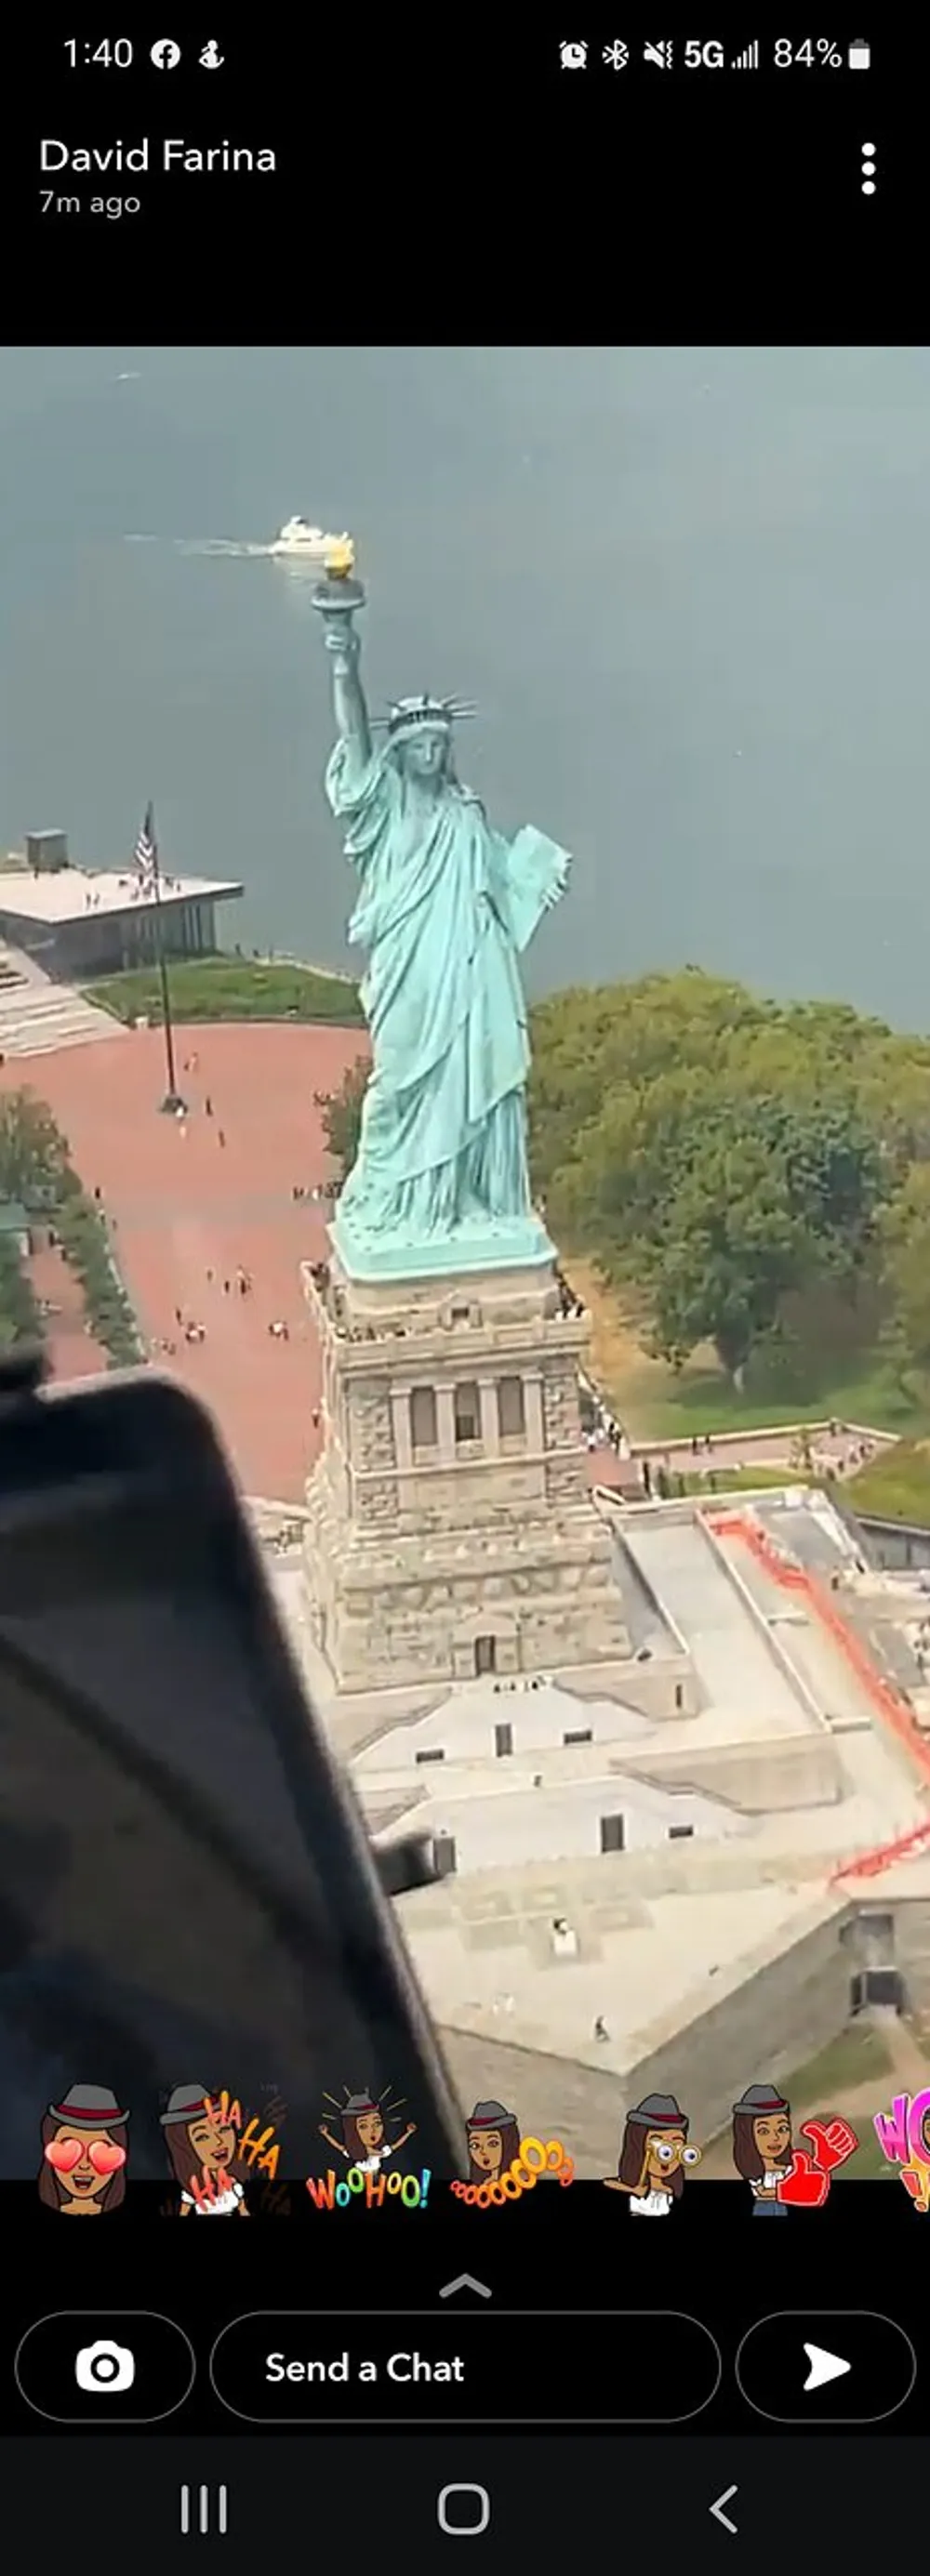 A screenshot from a mobile device displaying an aerial view of the Statue of Liberty with a decorative Snapchat caption and stickers at the bottom